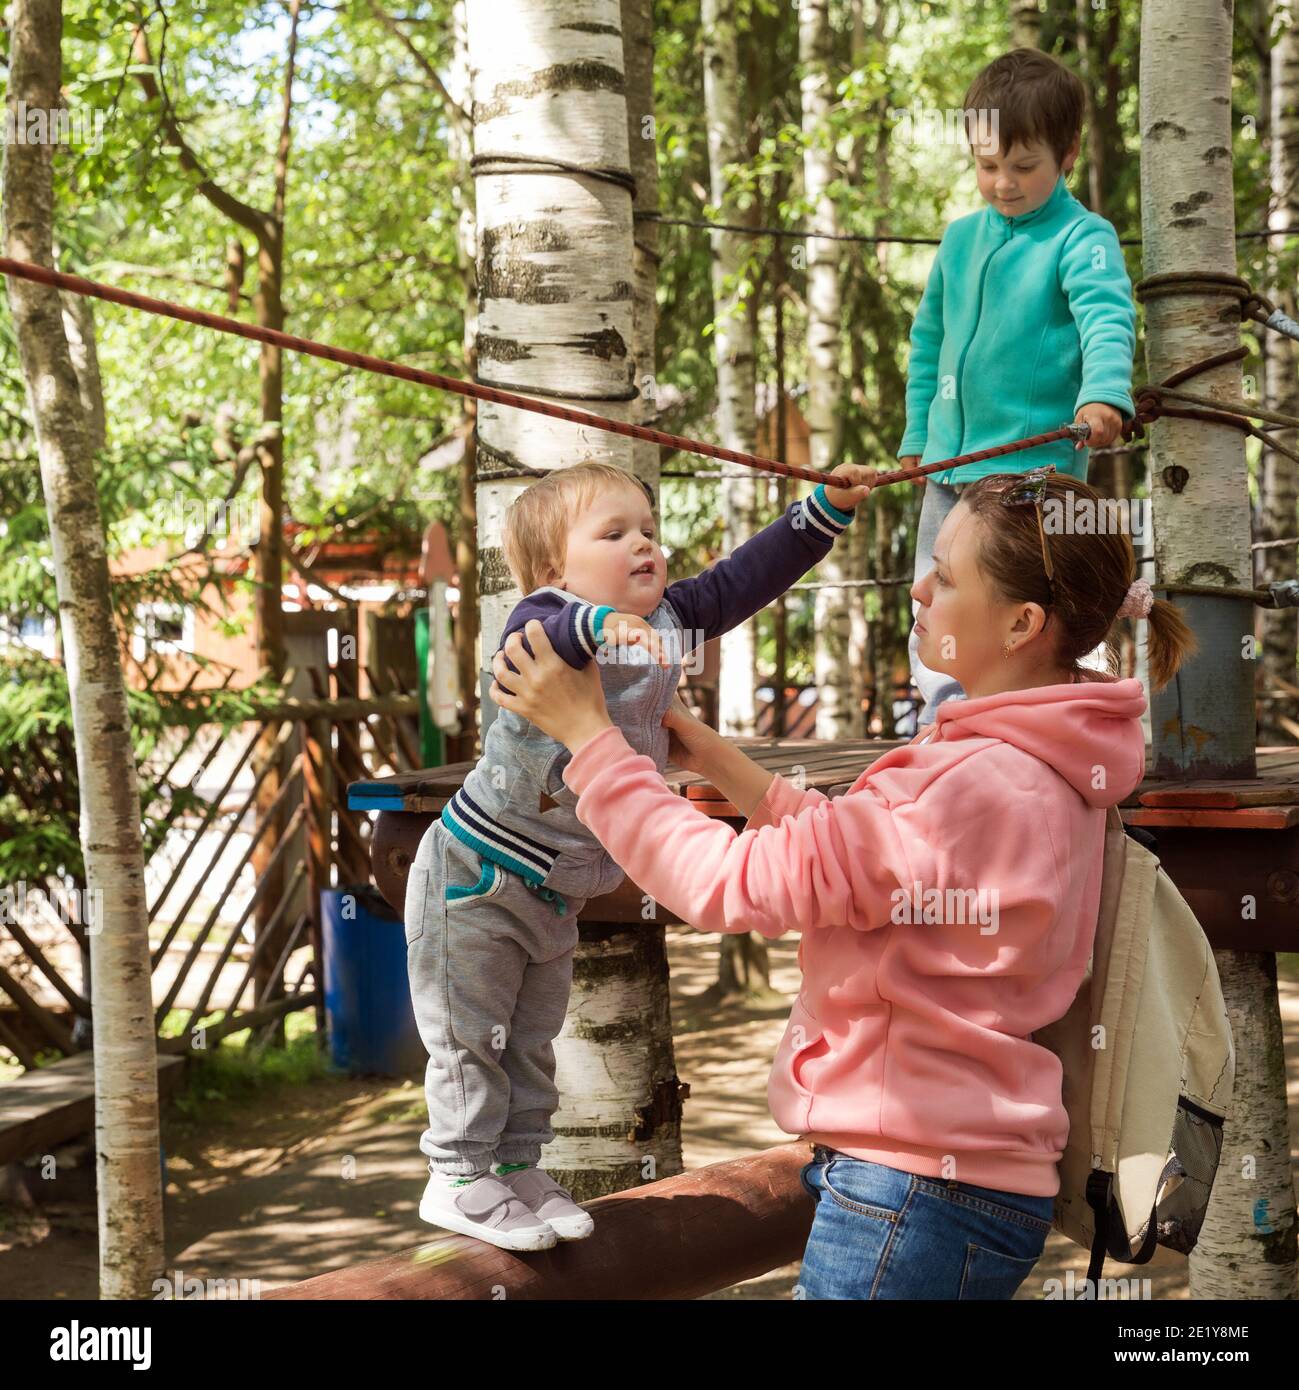 Family with children in the amusement park. Mom helps the baby stay on the obstacle course Stock Photo